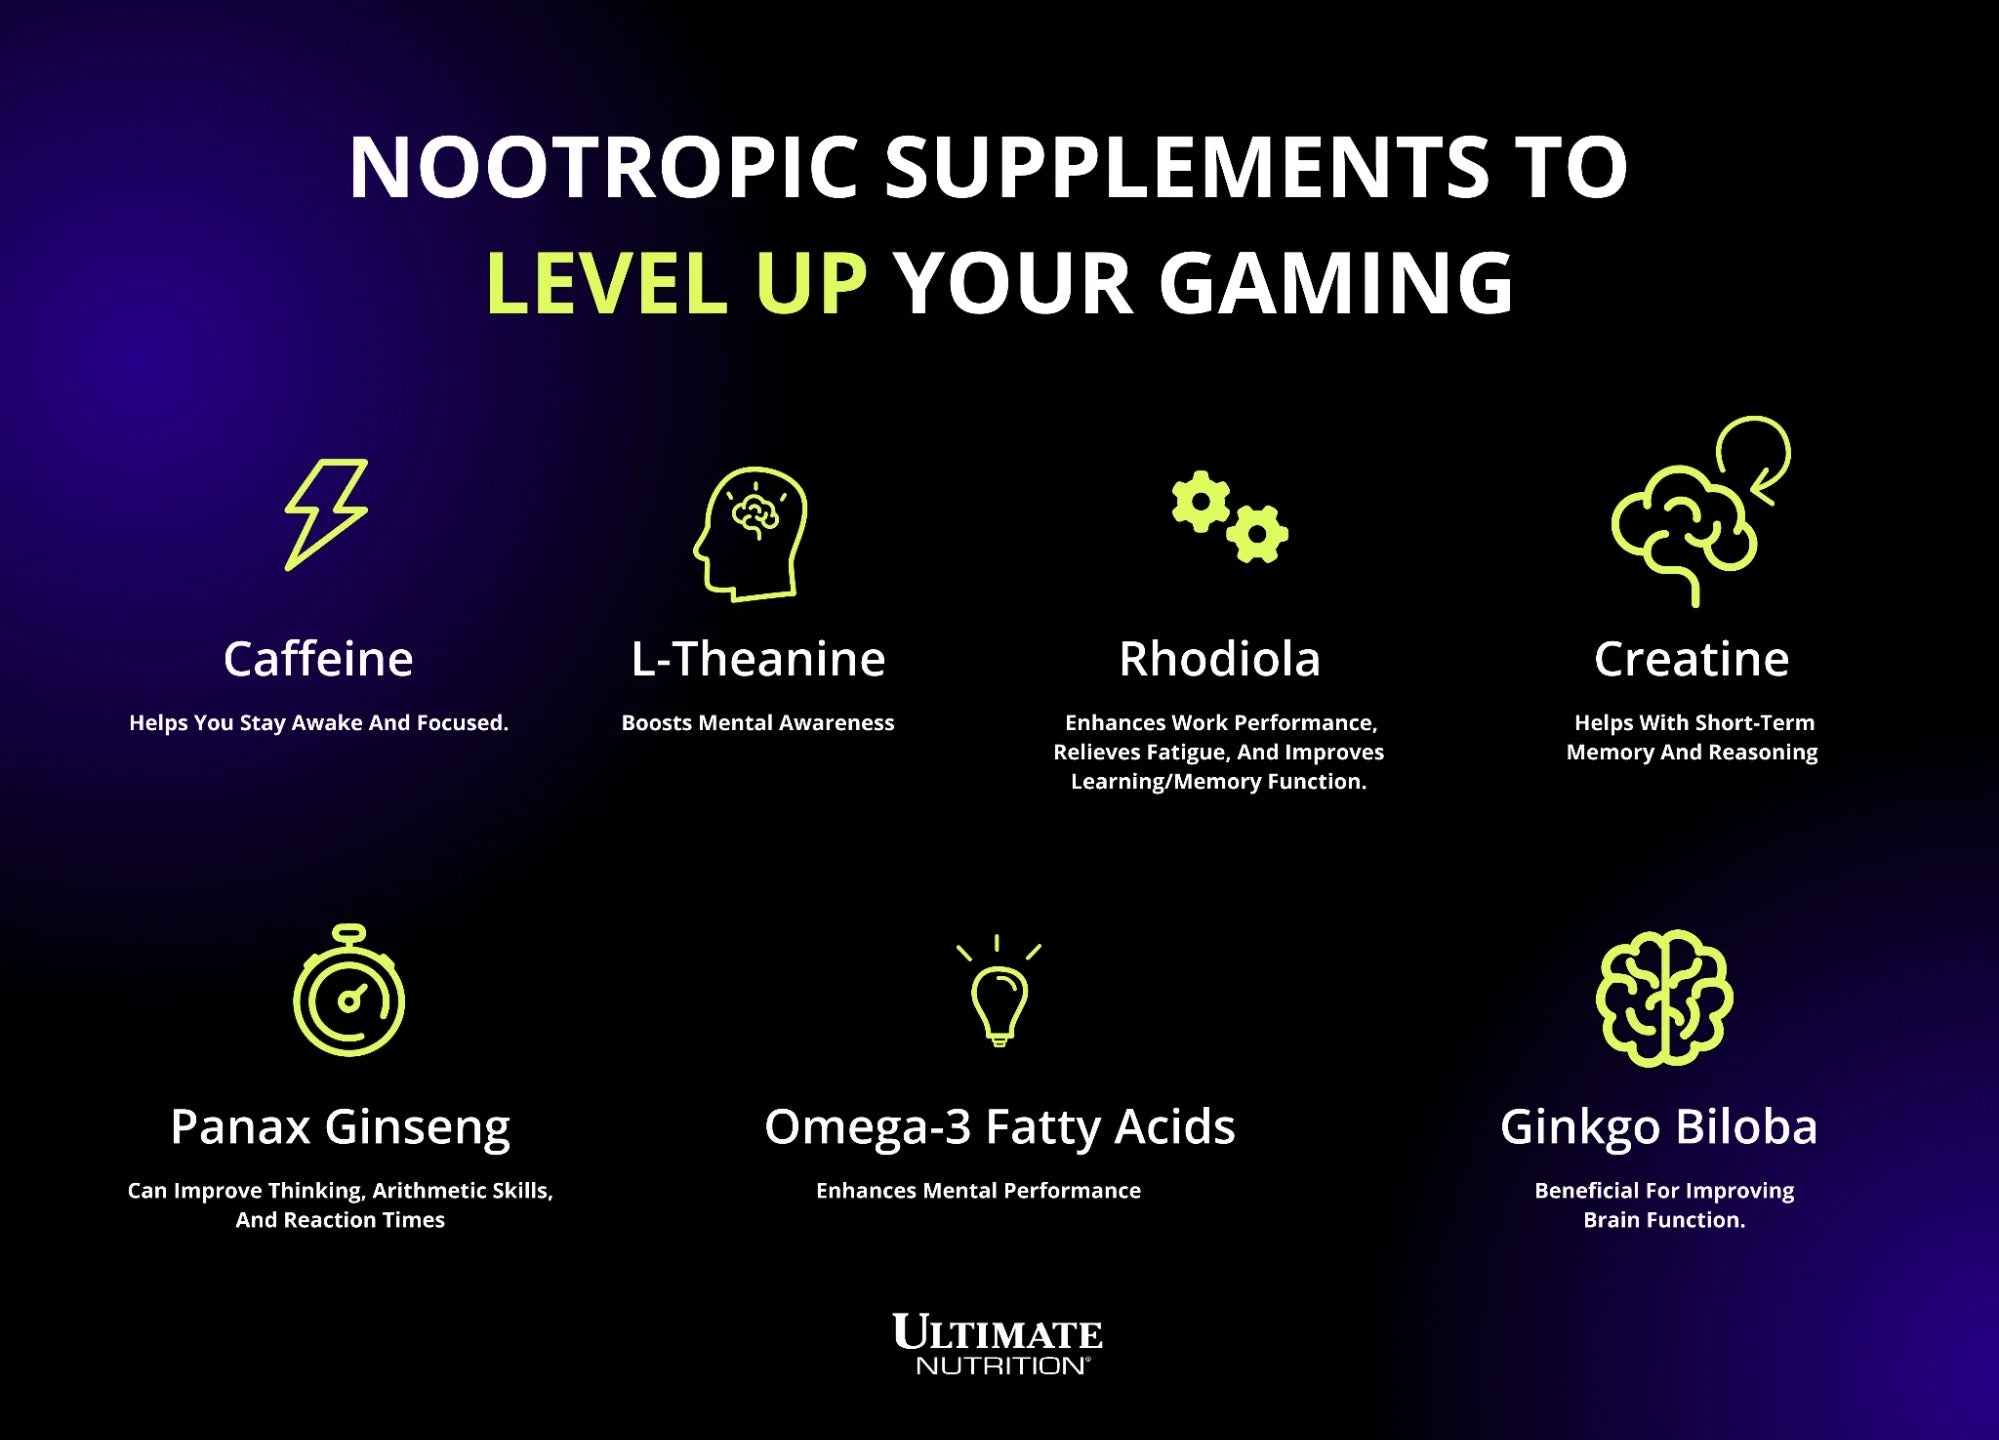 Nootropics for gamers